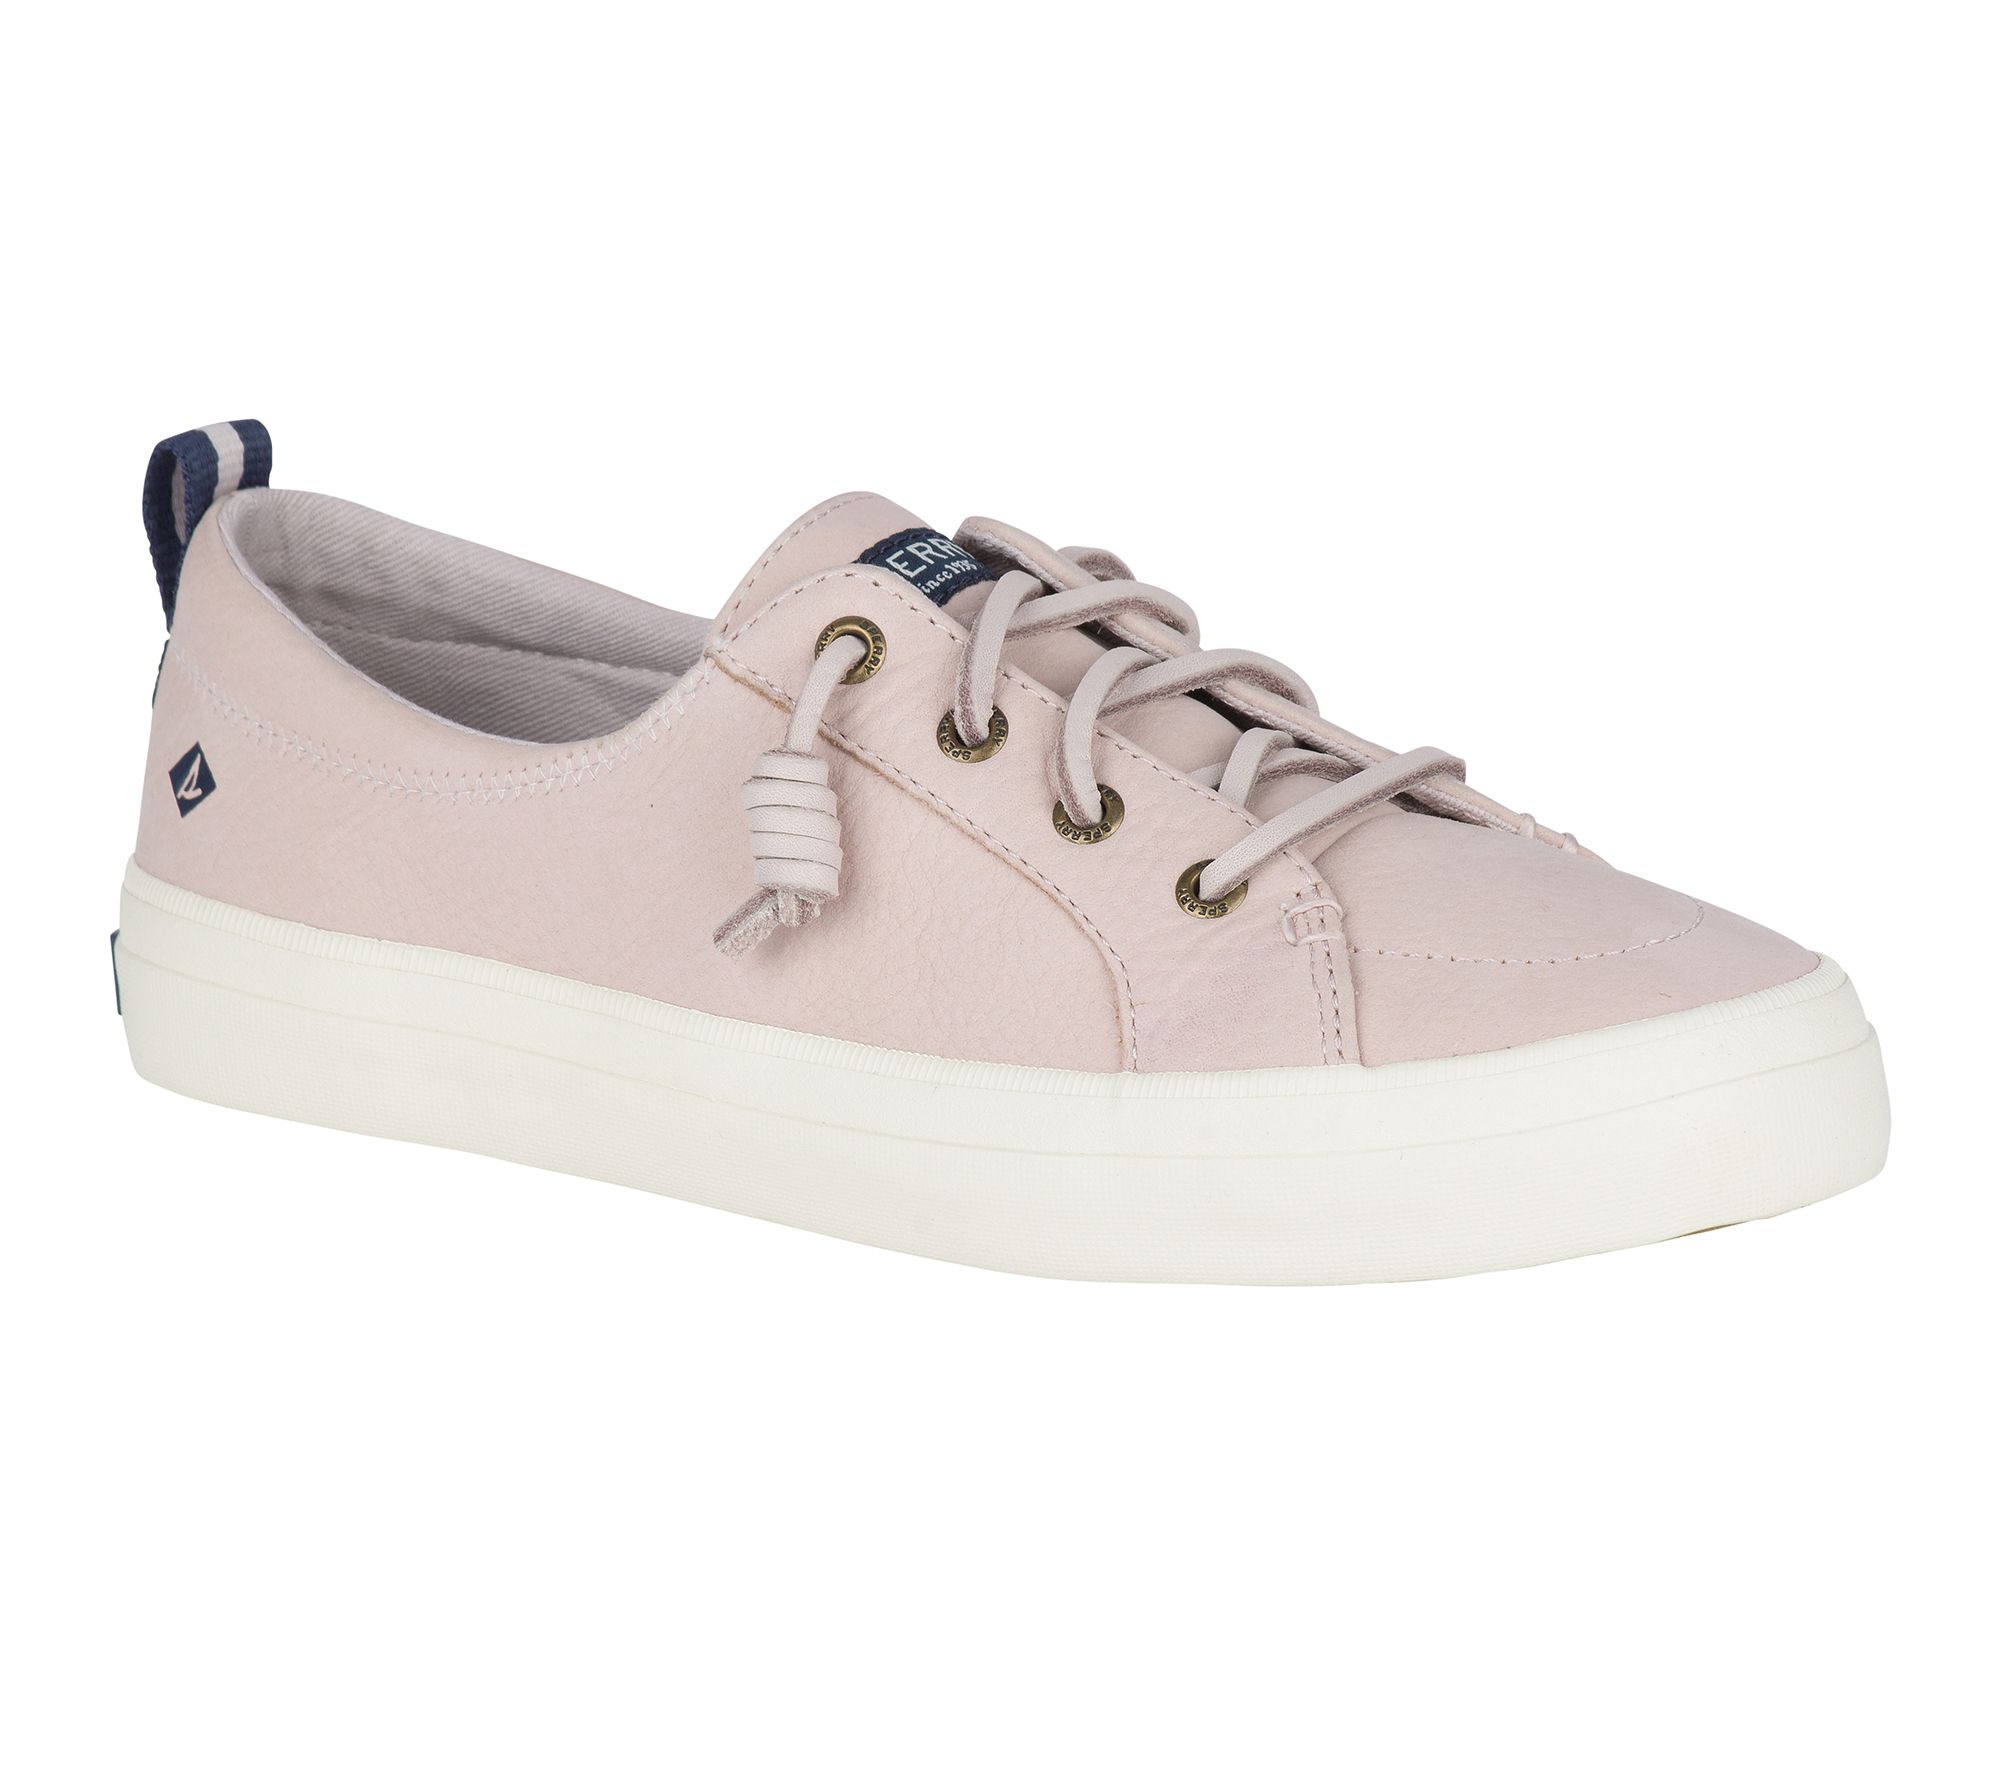 SPERRY Womens Crest Vibe Washable Leather Sneaker 